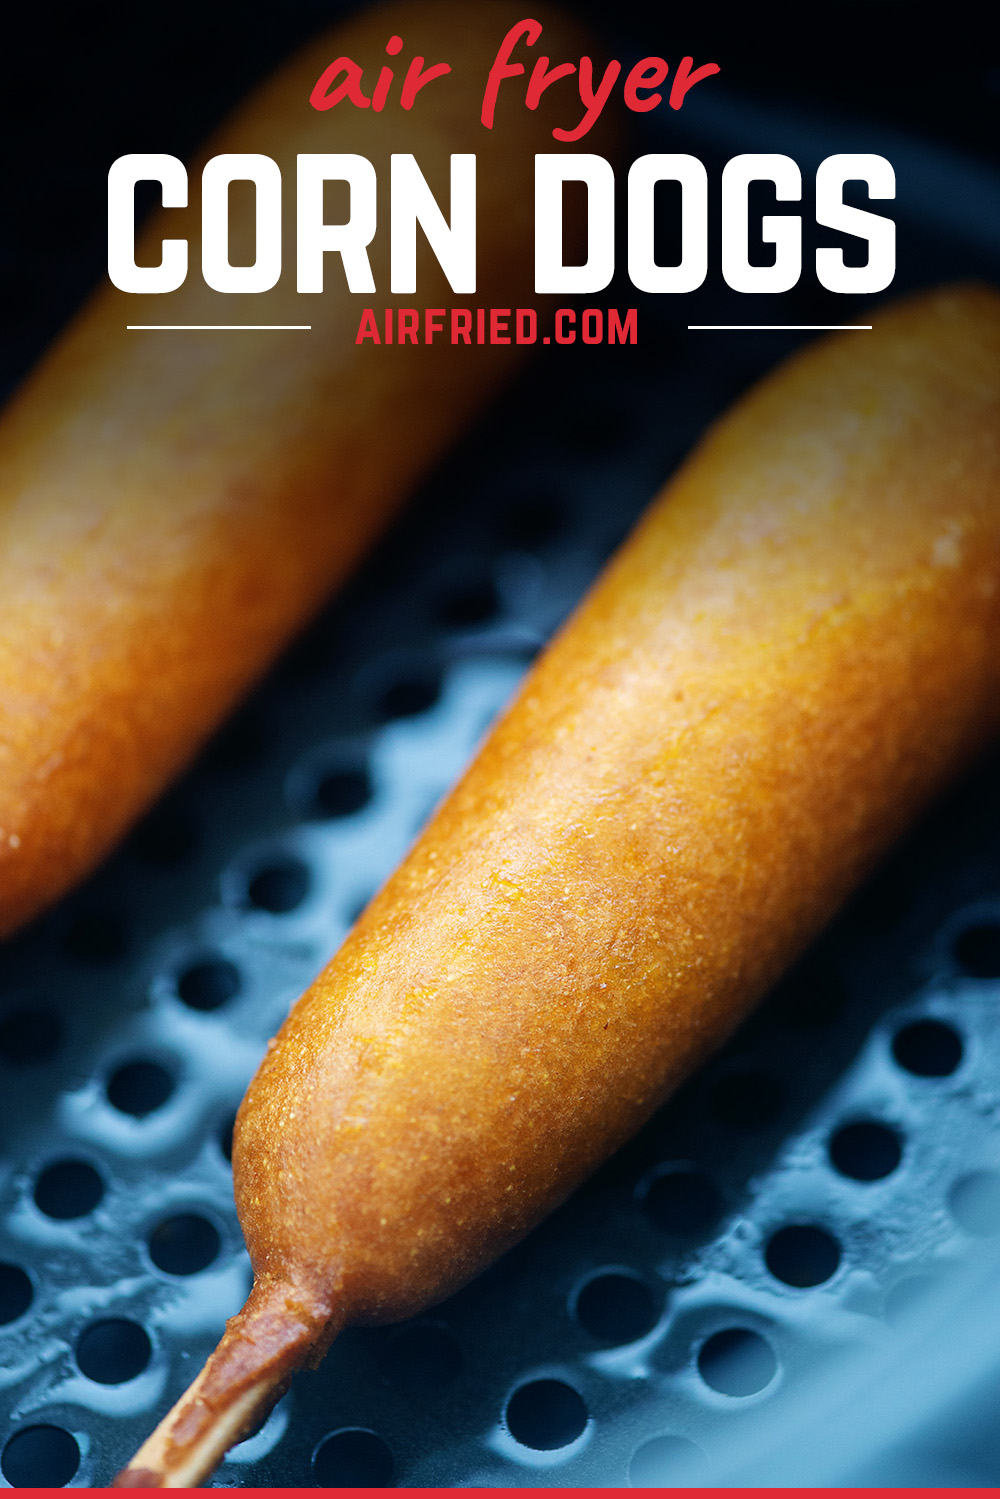 It's so easy to make corn dogs in the air fryer! They taste freshly fried, crispy, and delicious!